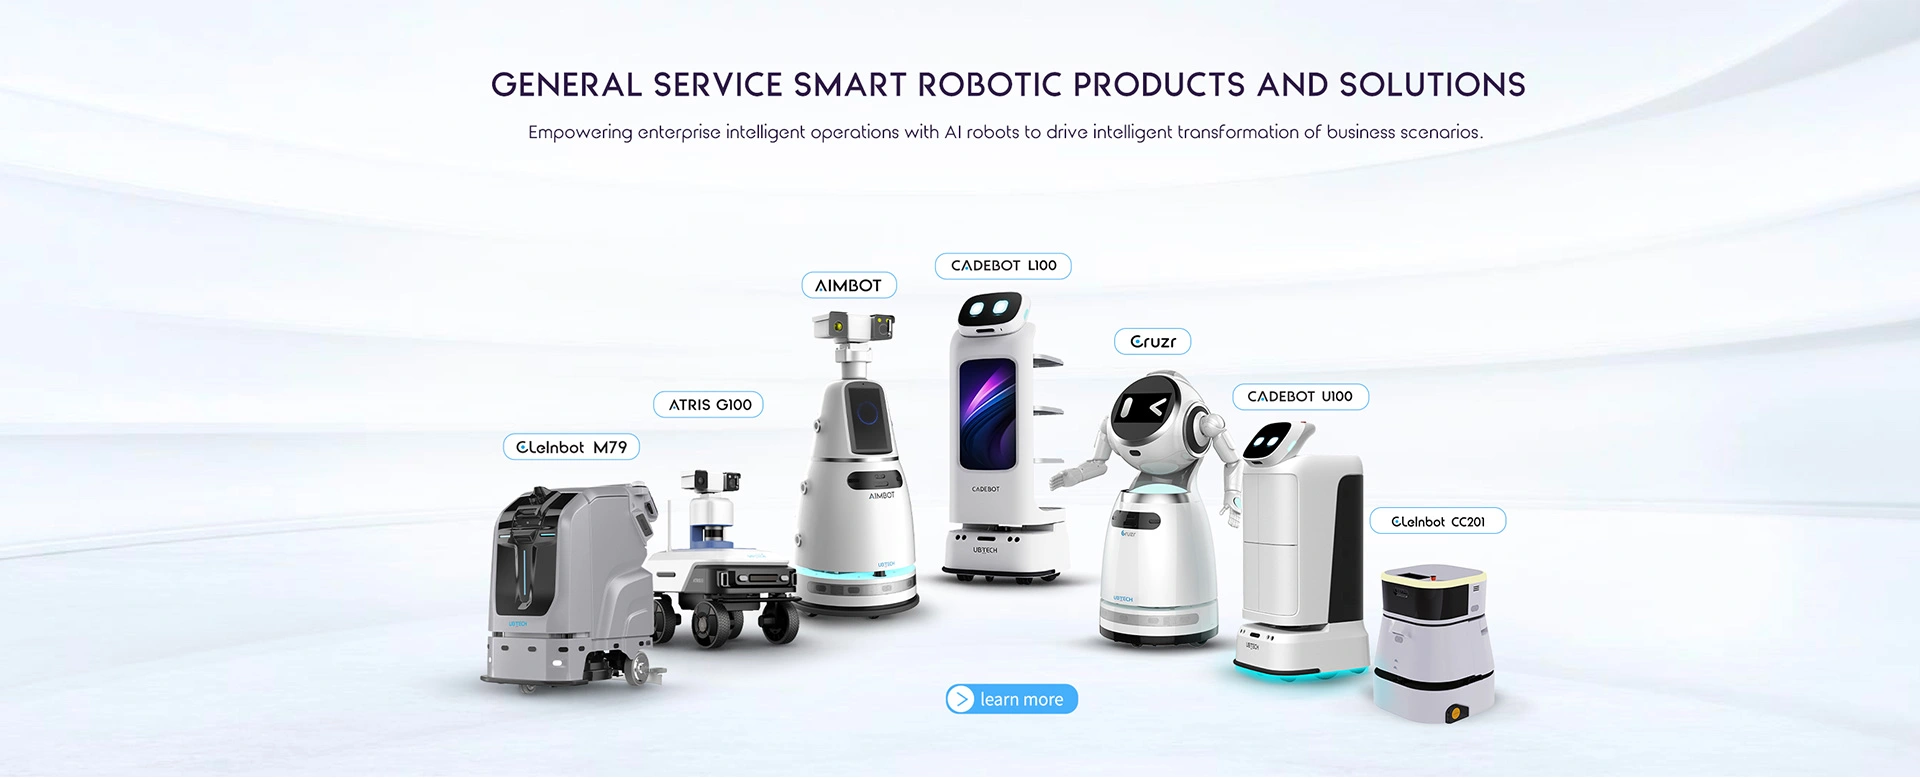 Ubtech Intelligent Service Robots And Solutions